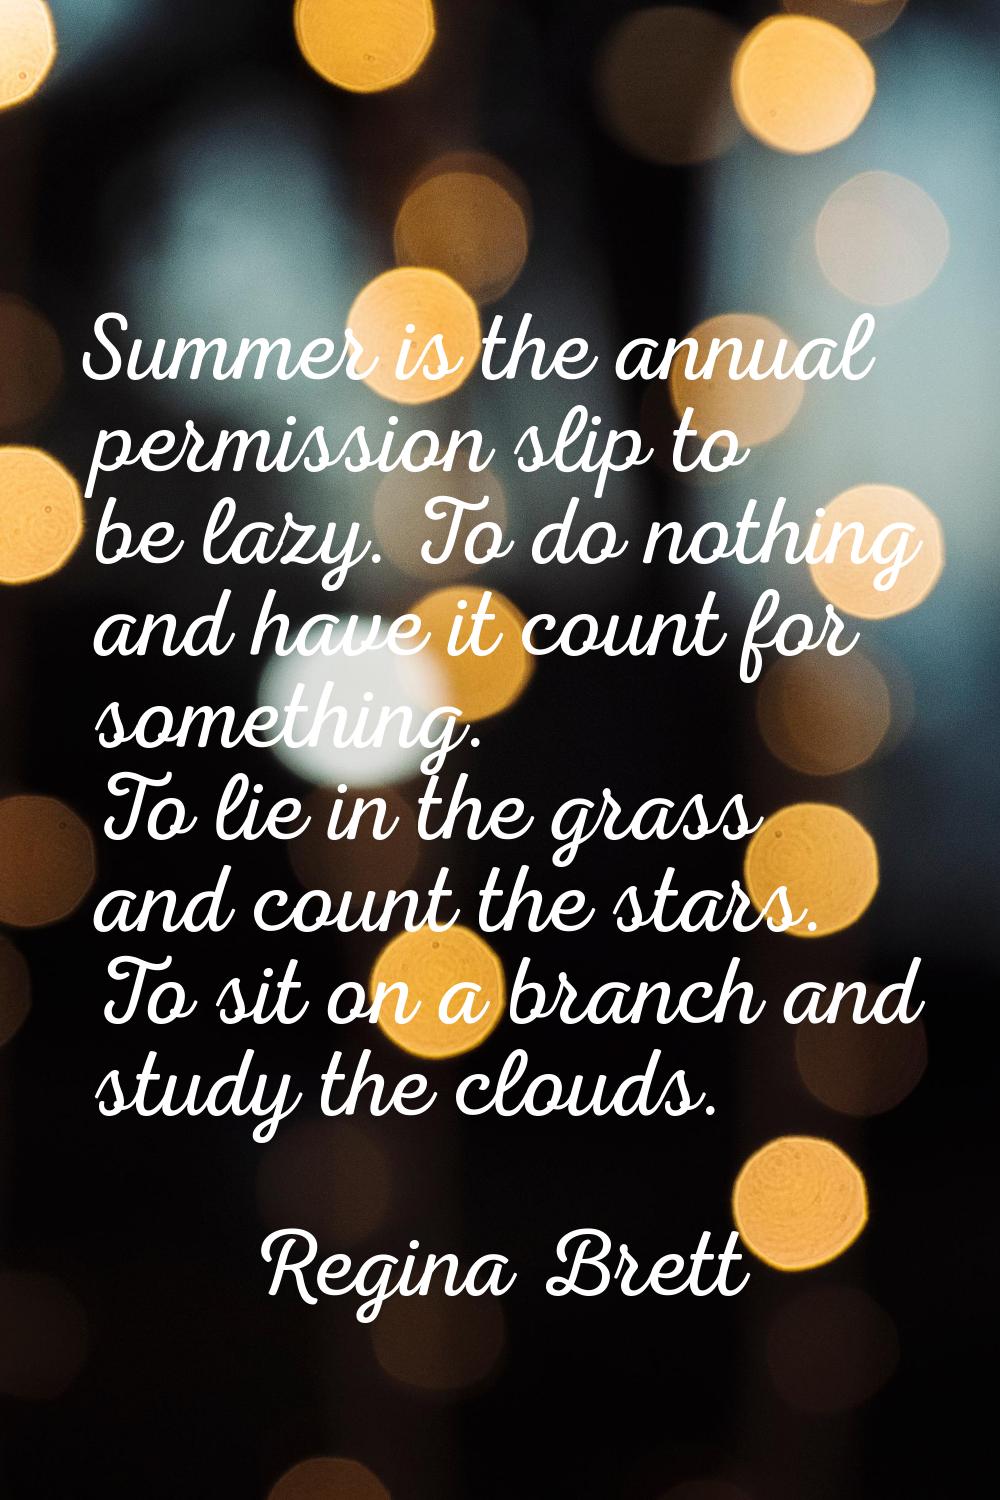 Summer is the annual permission slip to be lazy. To do nothing and have it count for something. To 